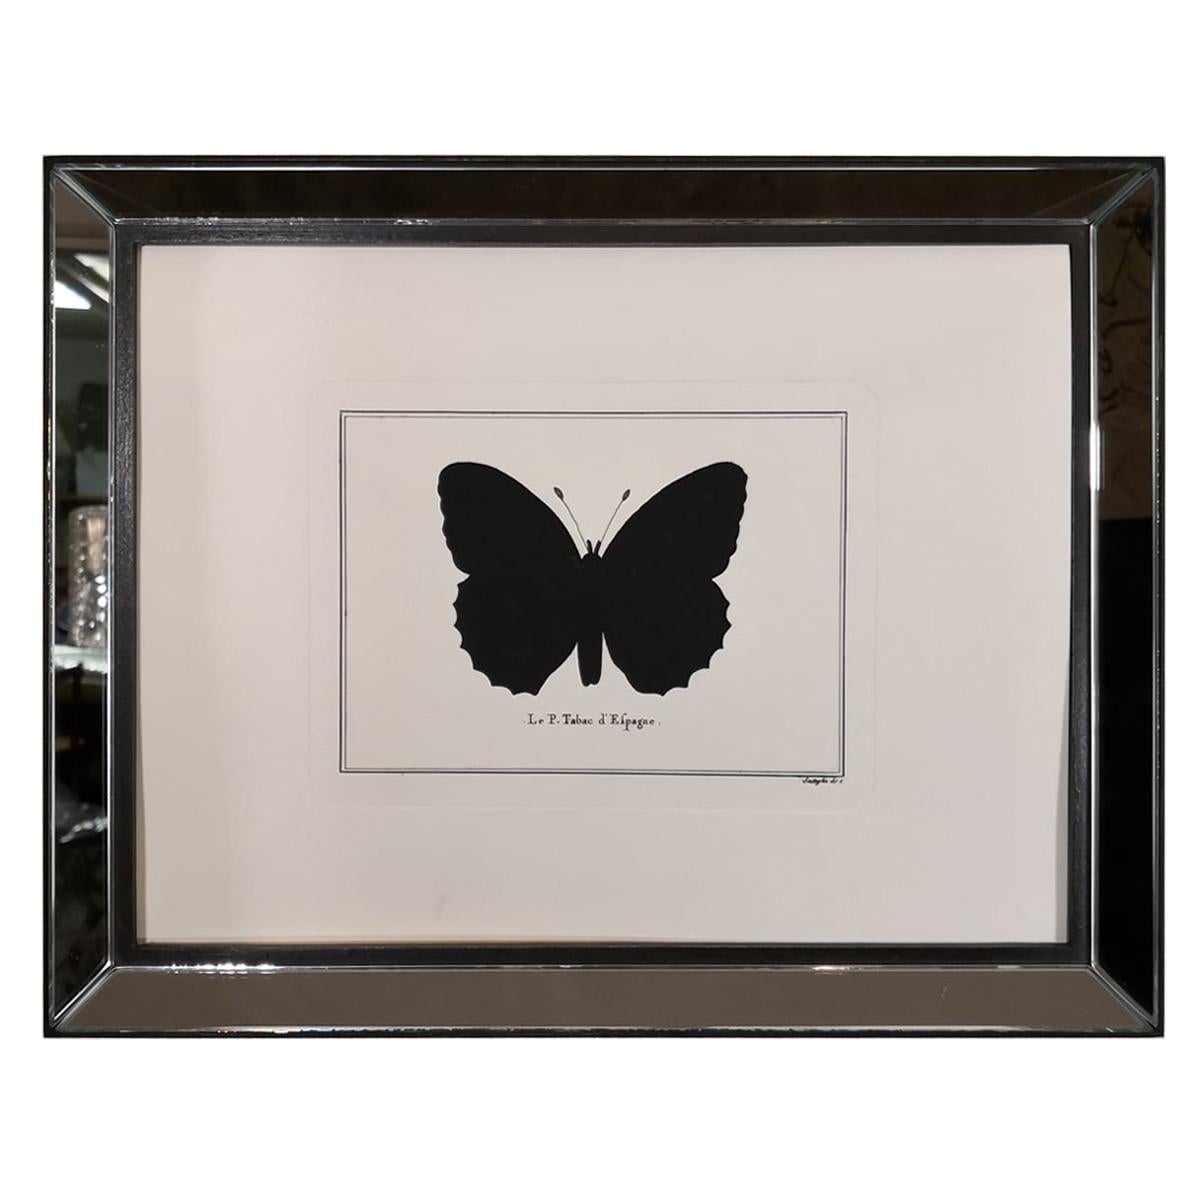 Contemporary Italian Hand-Colored Silver-Washed Butterfly Print with MirrorFrame